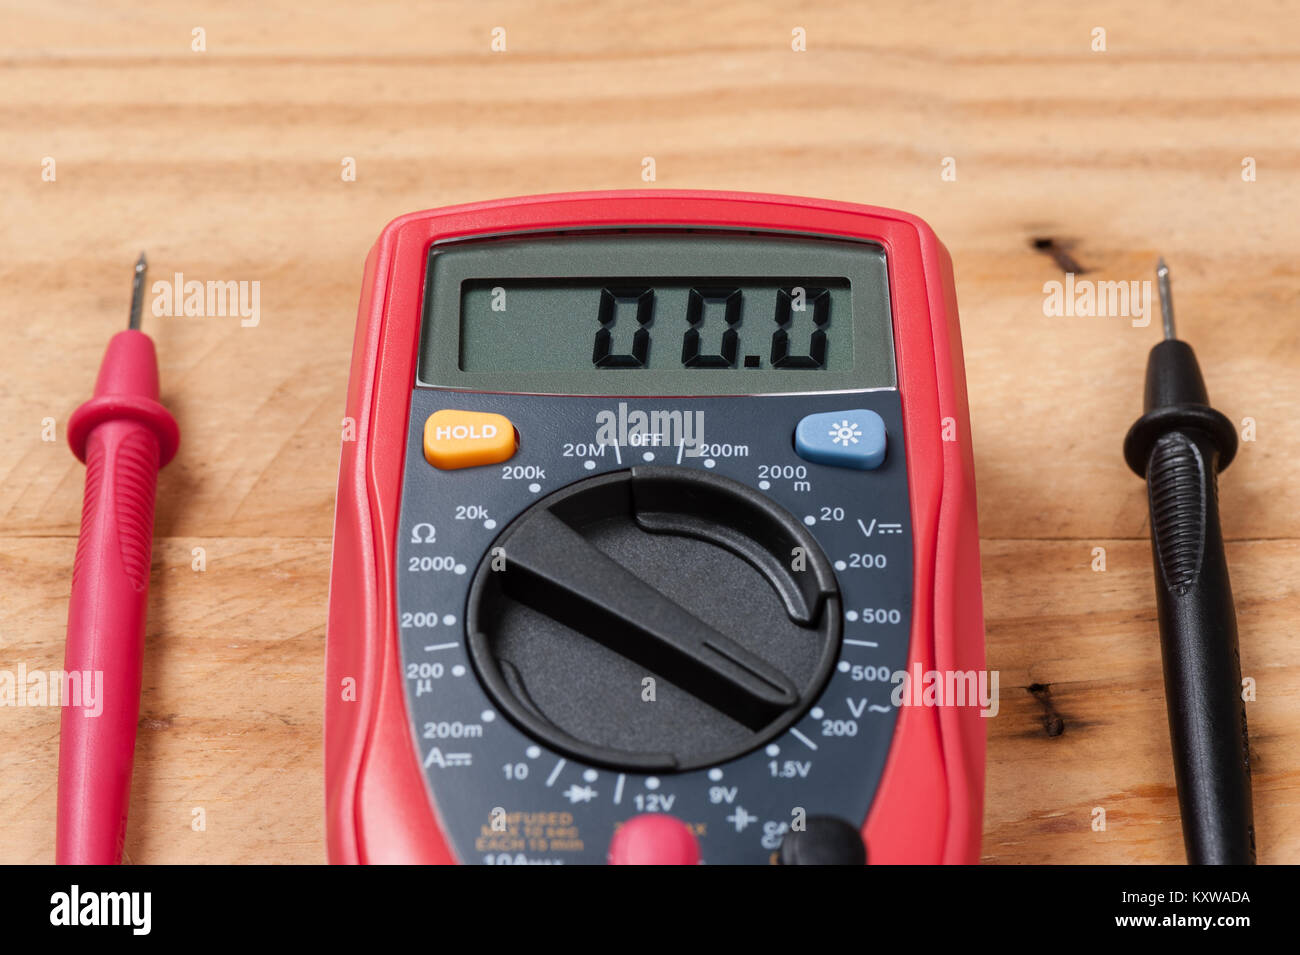 digital multimeter or multitester or Volt-Ohm meter, an electronic  measuring instrument that combines several measurement functions in one unit  Stock Photo - Alamy